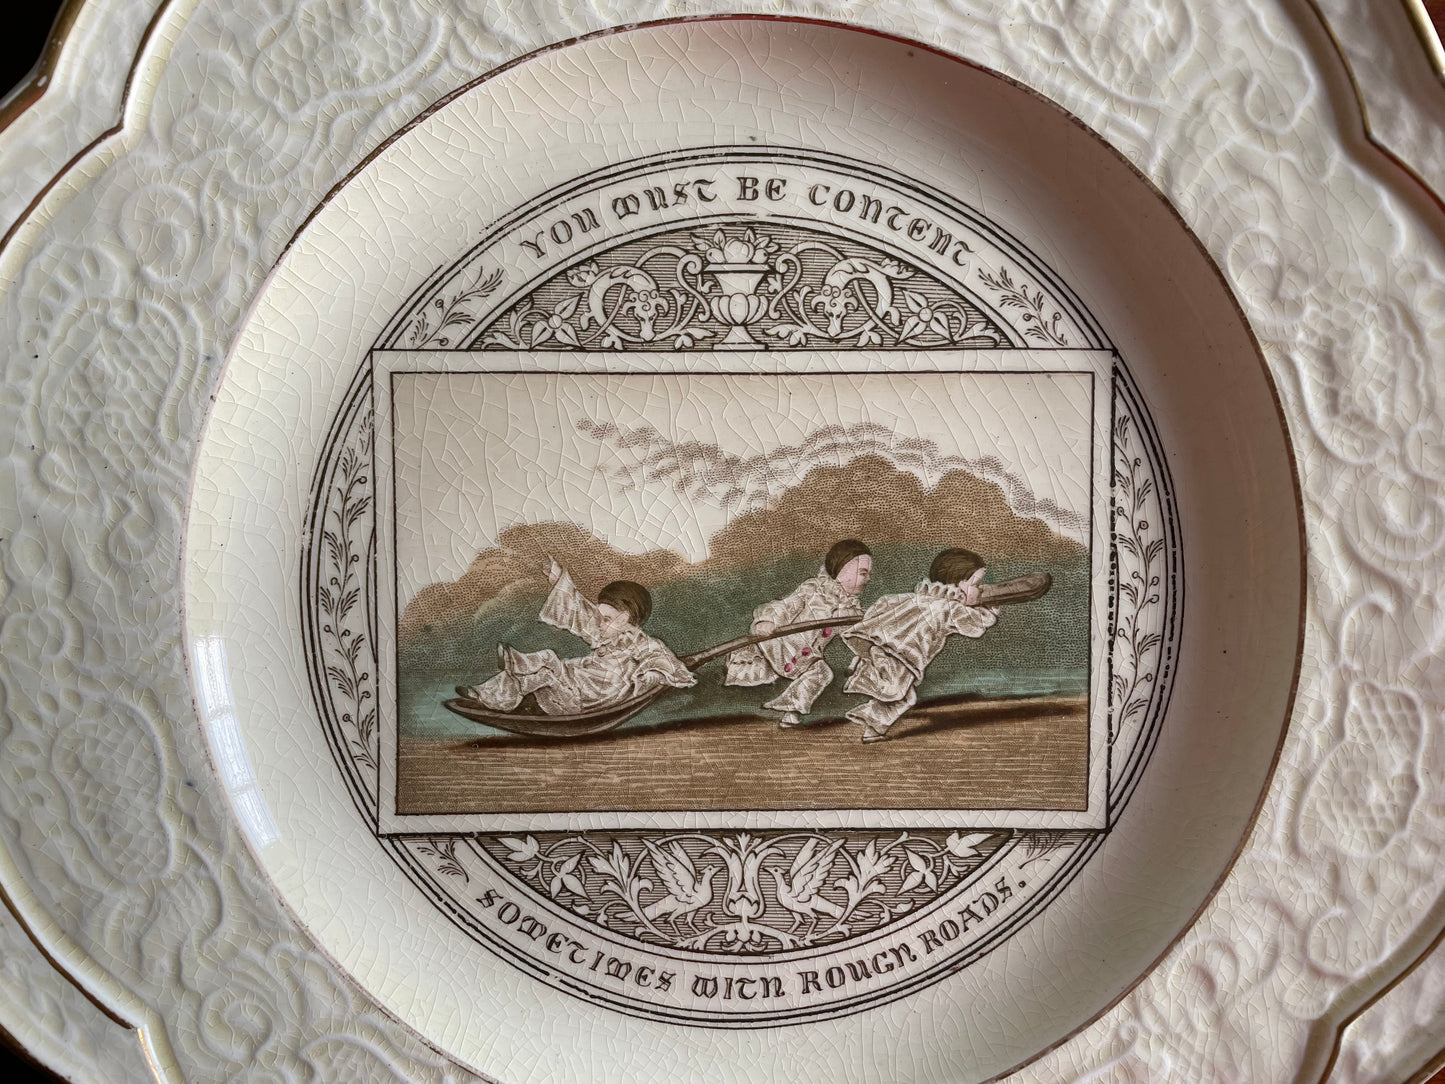 Wedgwood "Gastronomic Homilies" Card Motto Series Plate c. 1877 - "You must be content sometimes with rough roads."